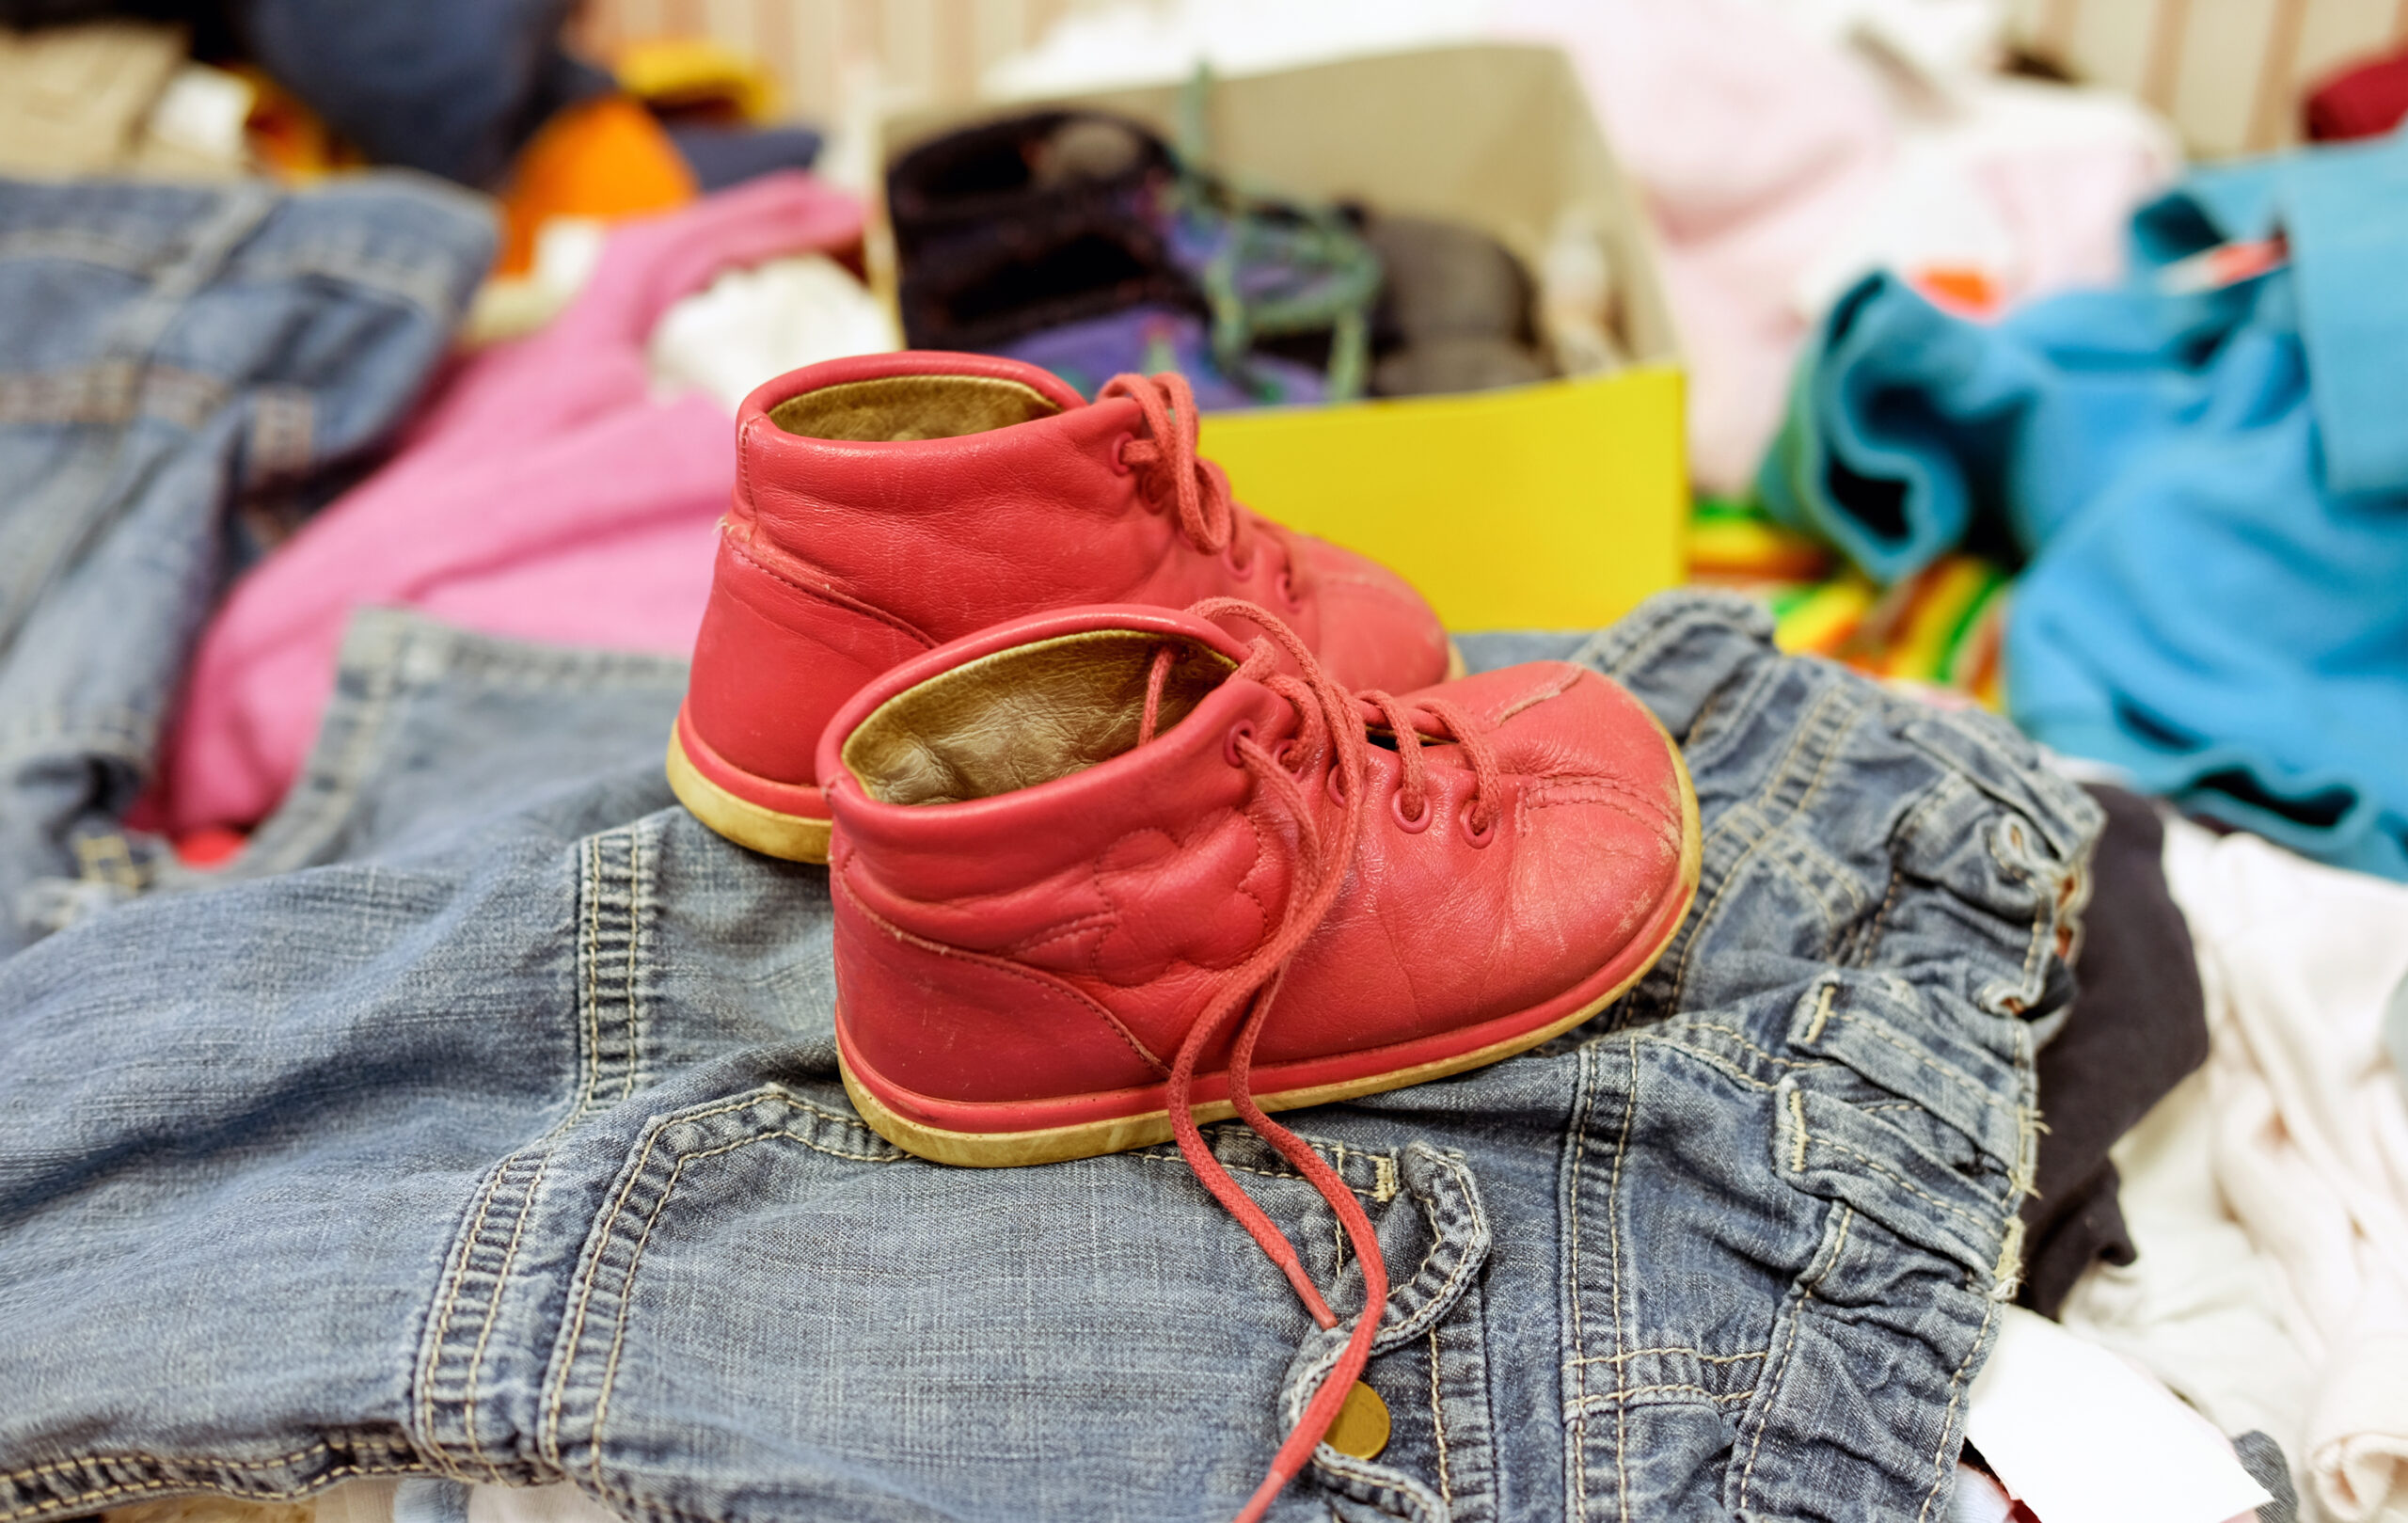 Used,Red,Shoes,For,Children,In,A,Thrift,Shop,Between